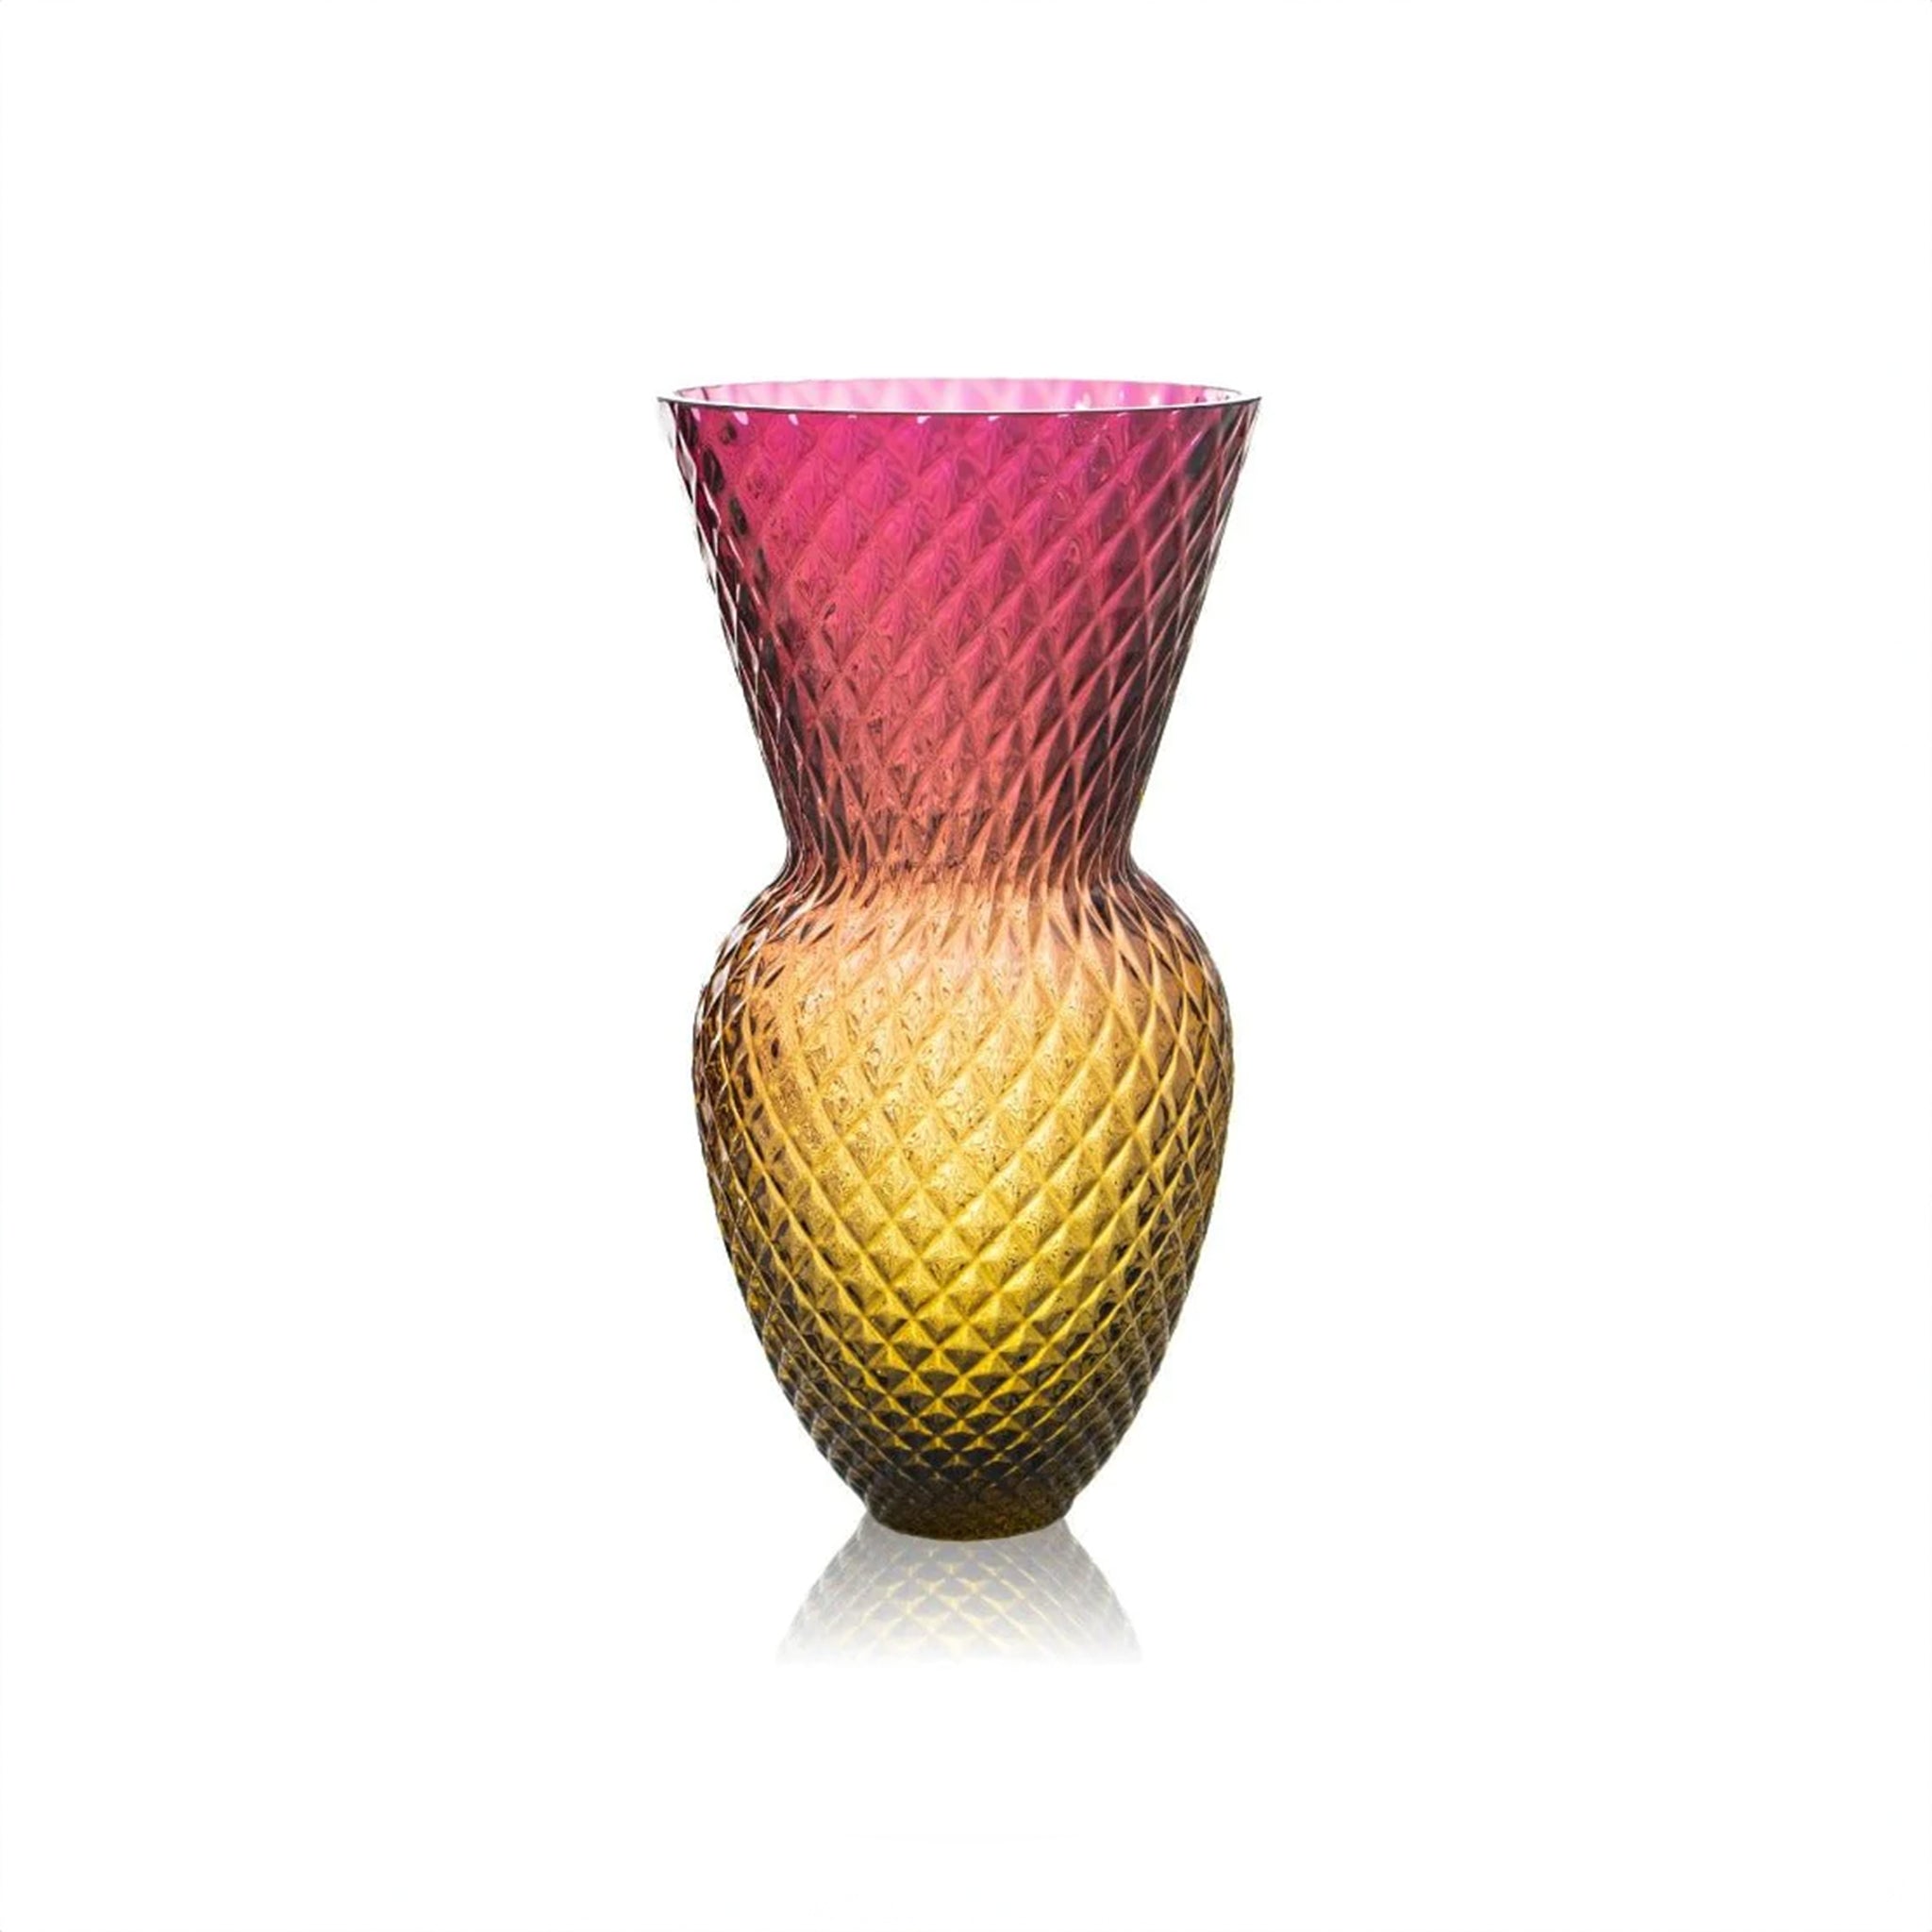 A close-up of a textured vase with a narrow neck, flaring out to a wider body and base. The top half is in a gradient of pink to red, while the bottom half transitions from gold to dark yellow.